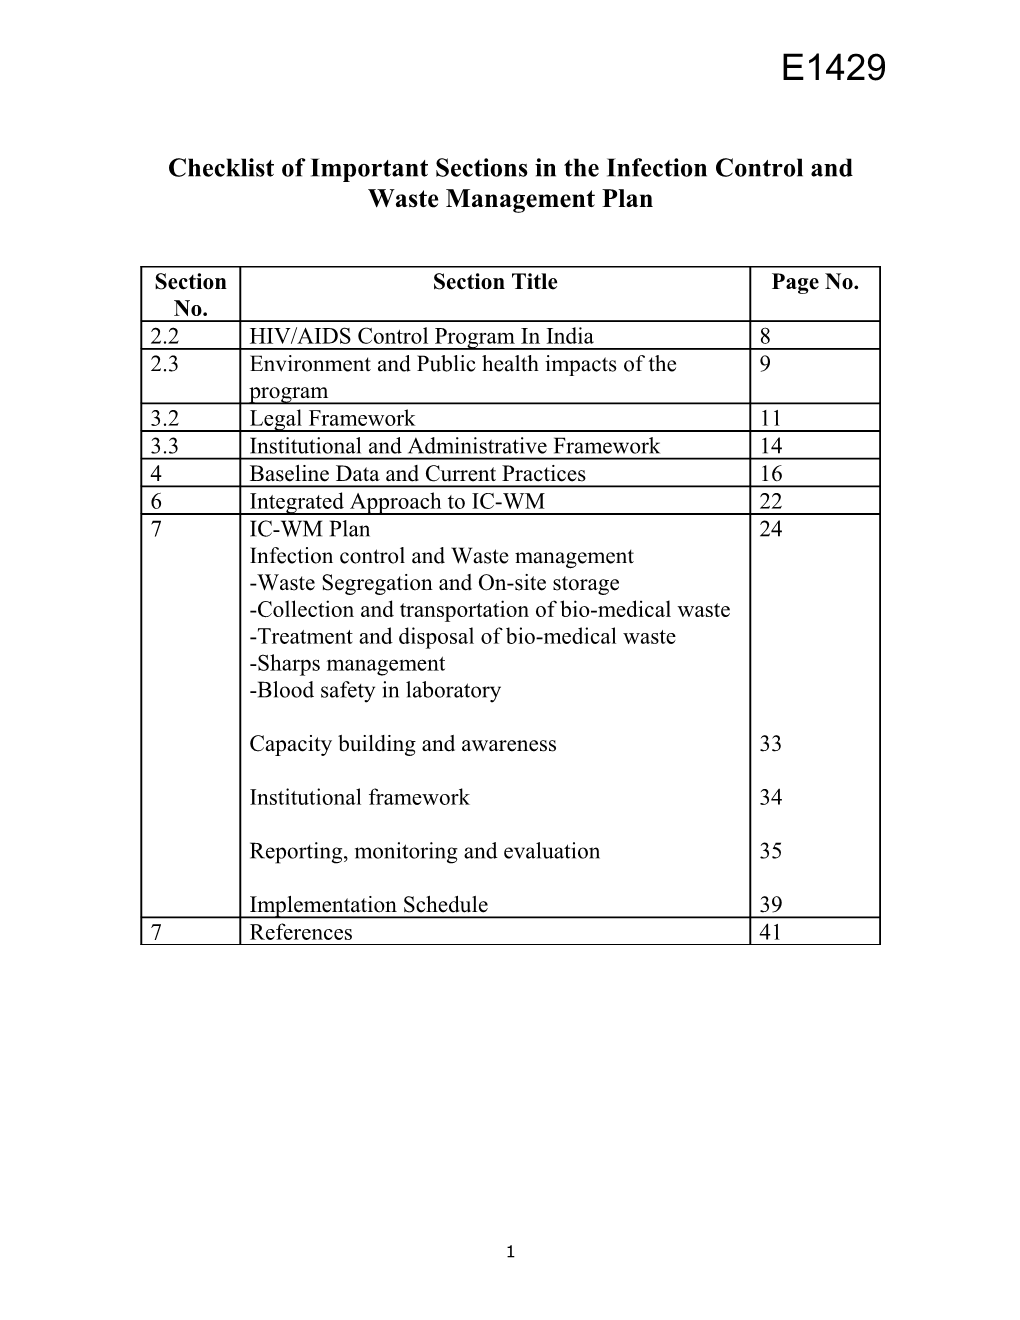 Checklist of Important Sections in the Infection Control and Waste Management Plan